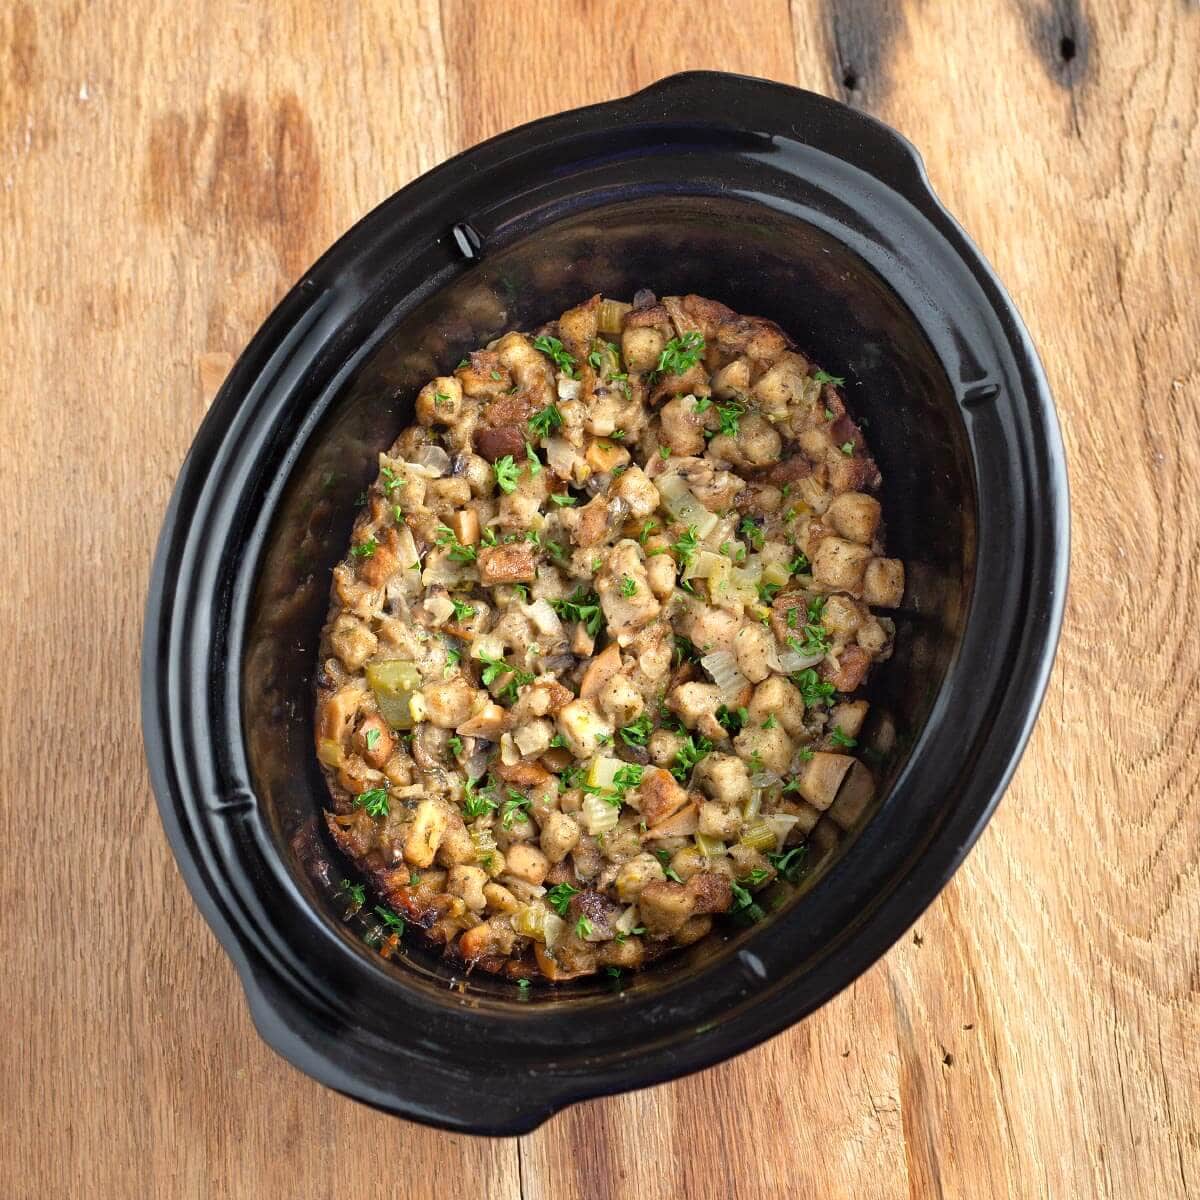 https://www.simplyhappyfoodie.com/wp-content/uploads/2021/11/easy-slow-cooker-stuffing-featuredb.jpg